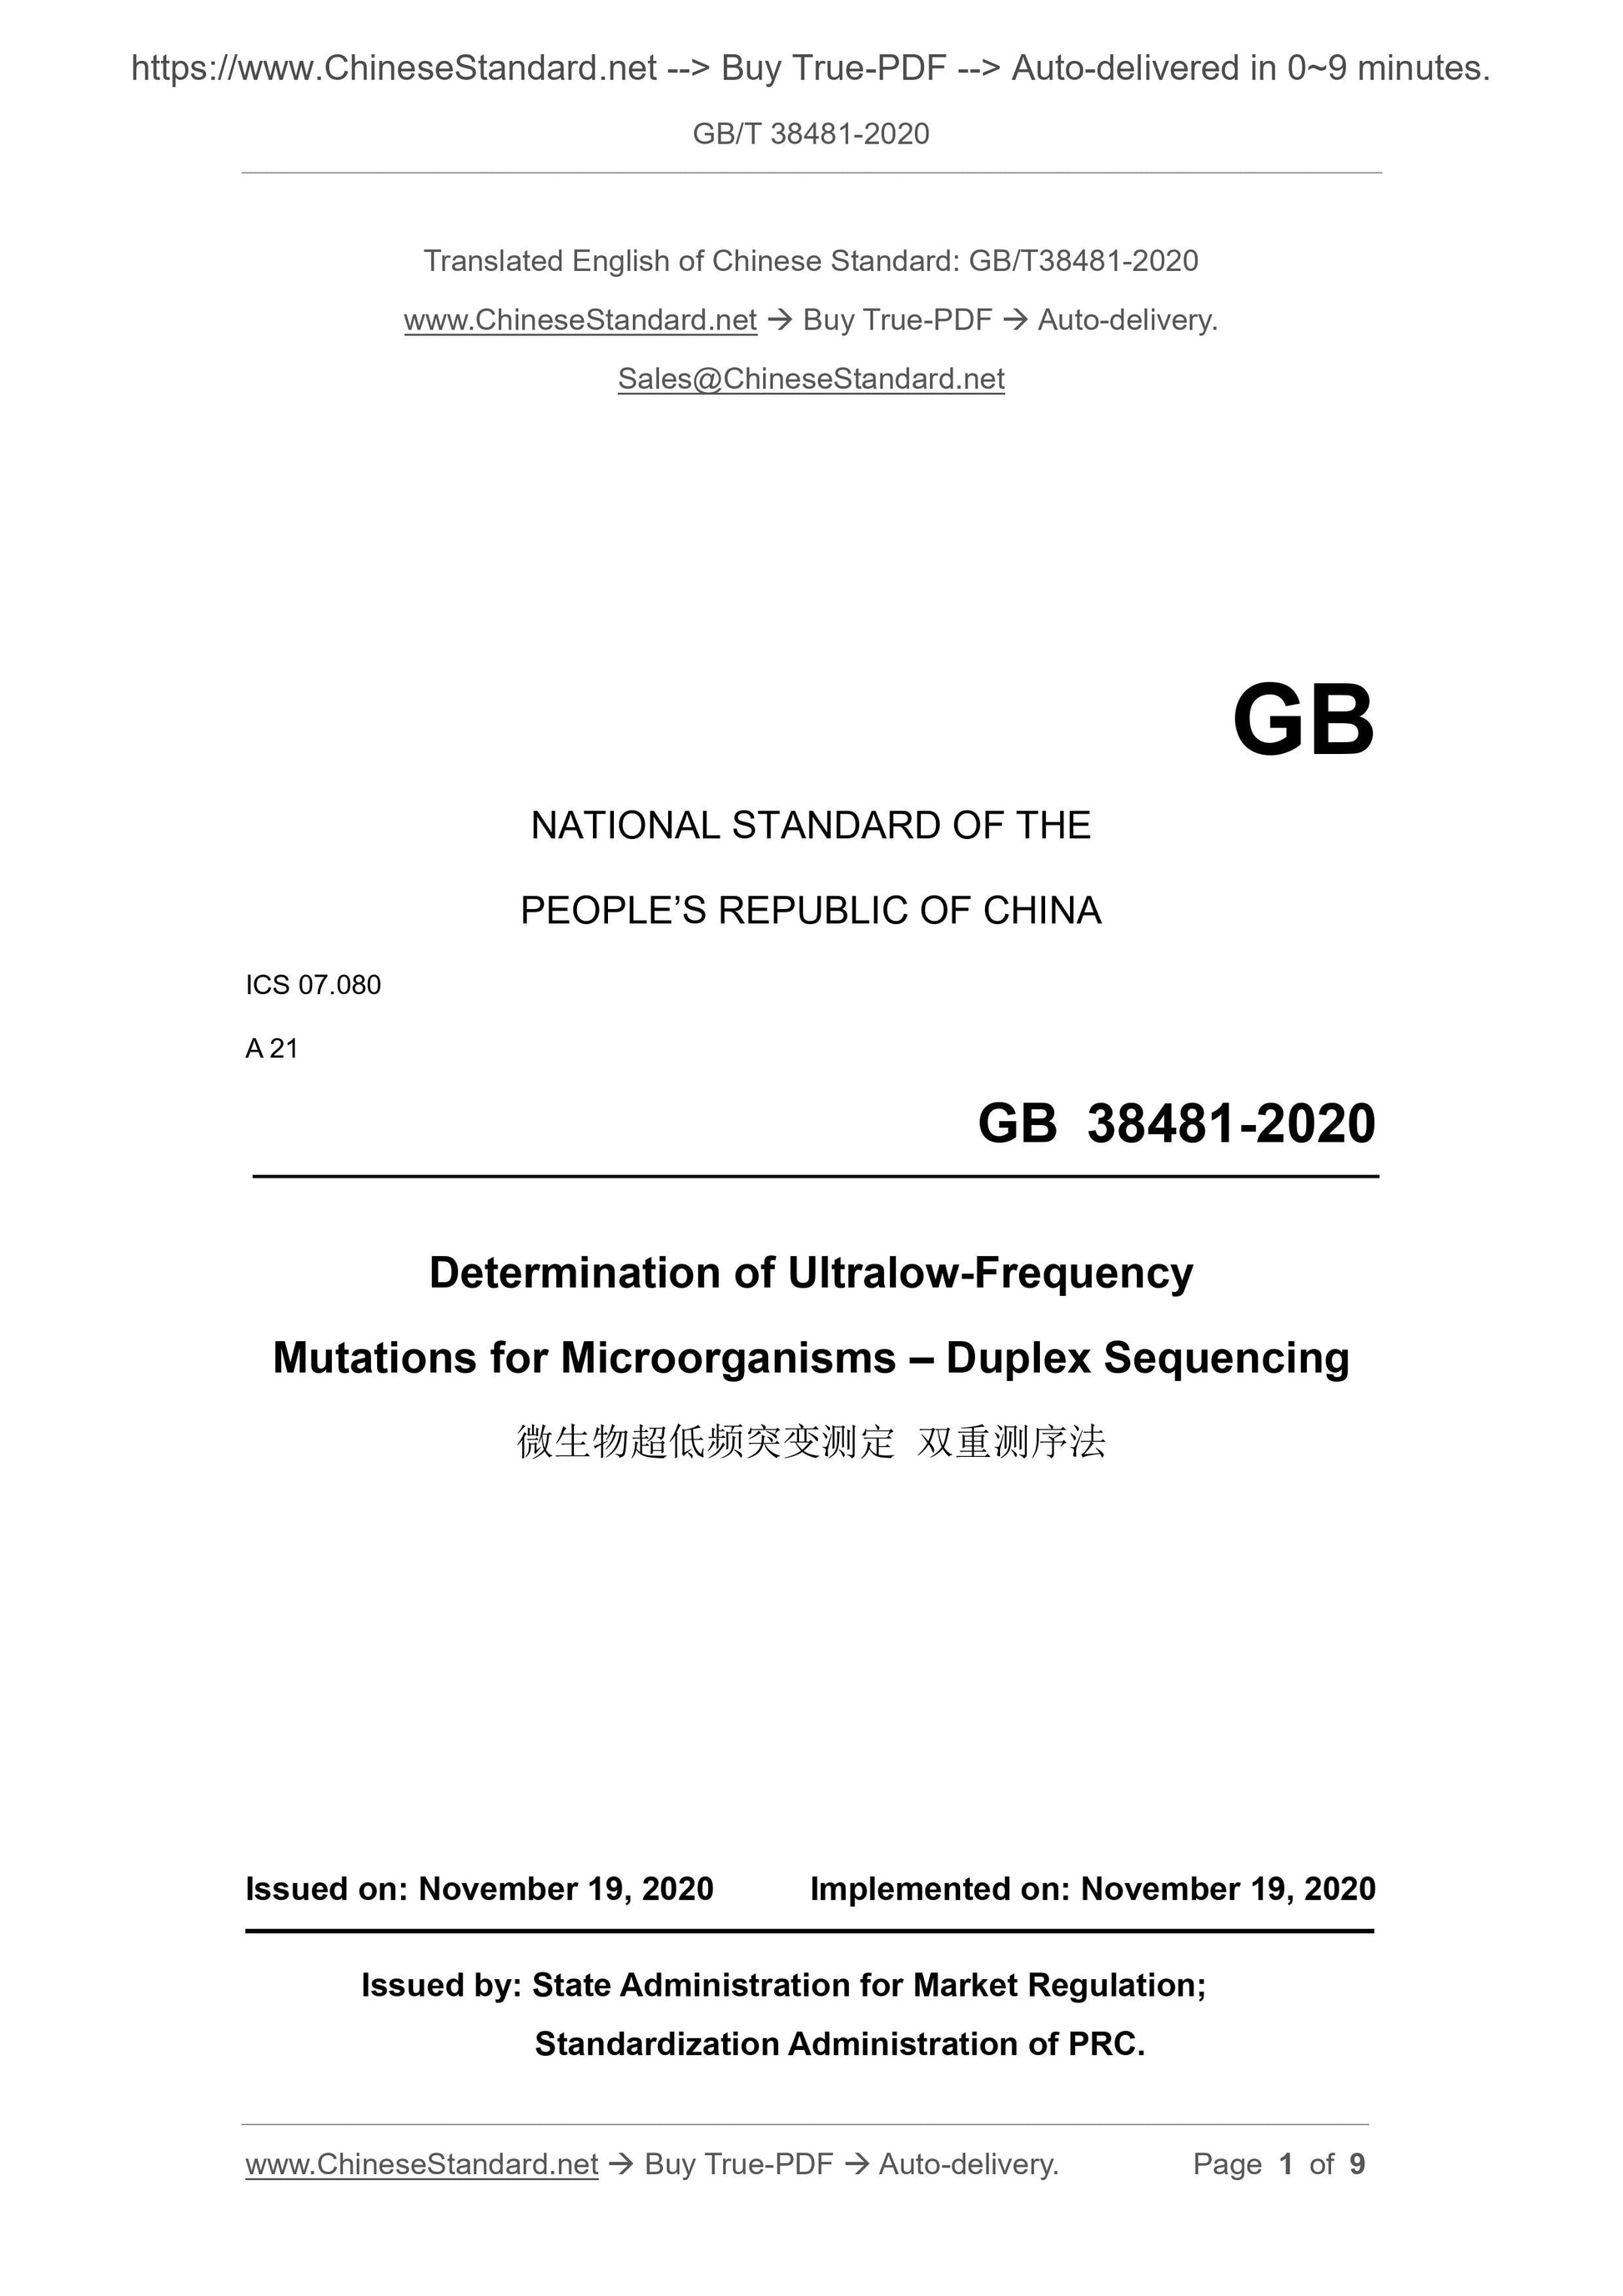 GB/T 38481-2020 Page 1